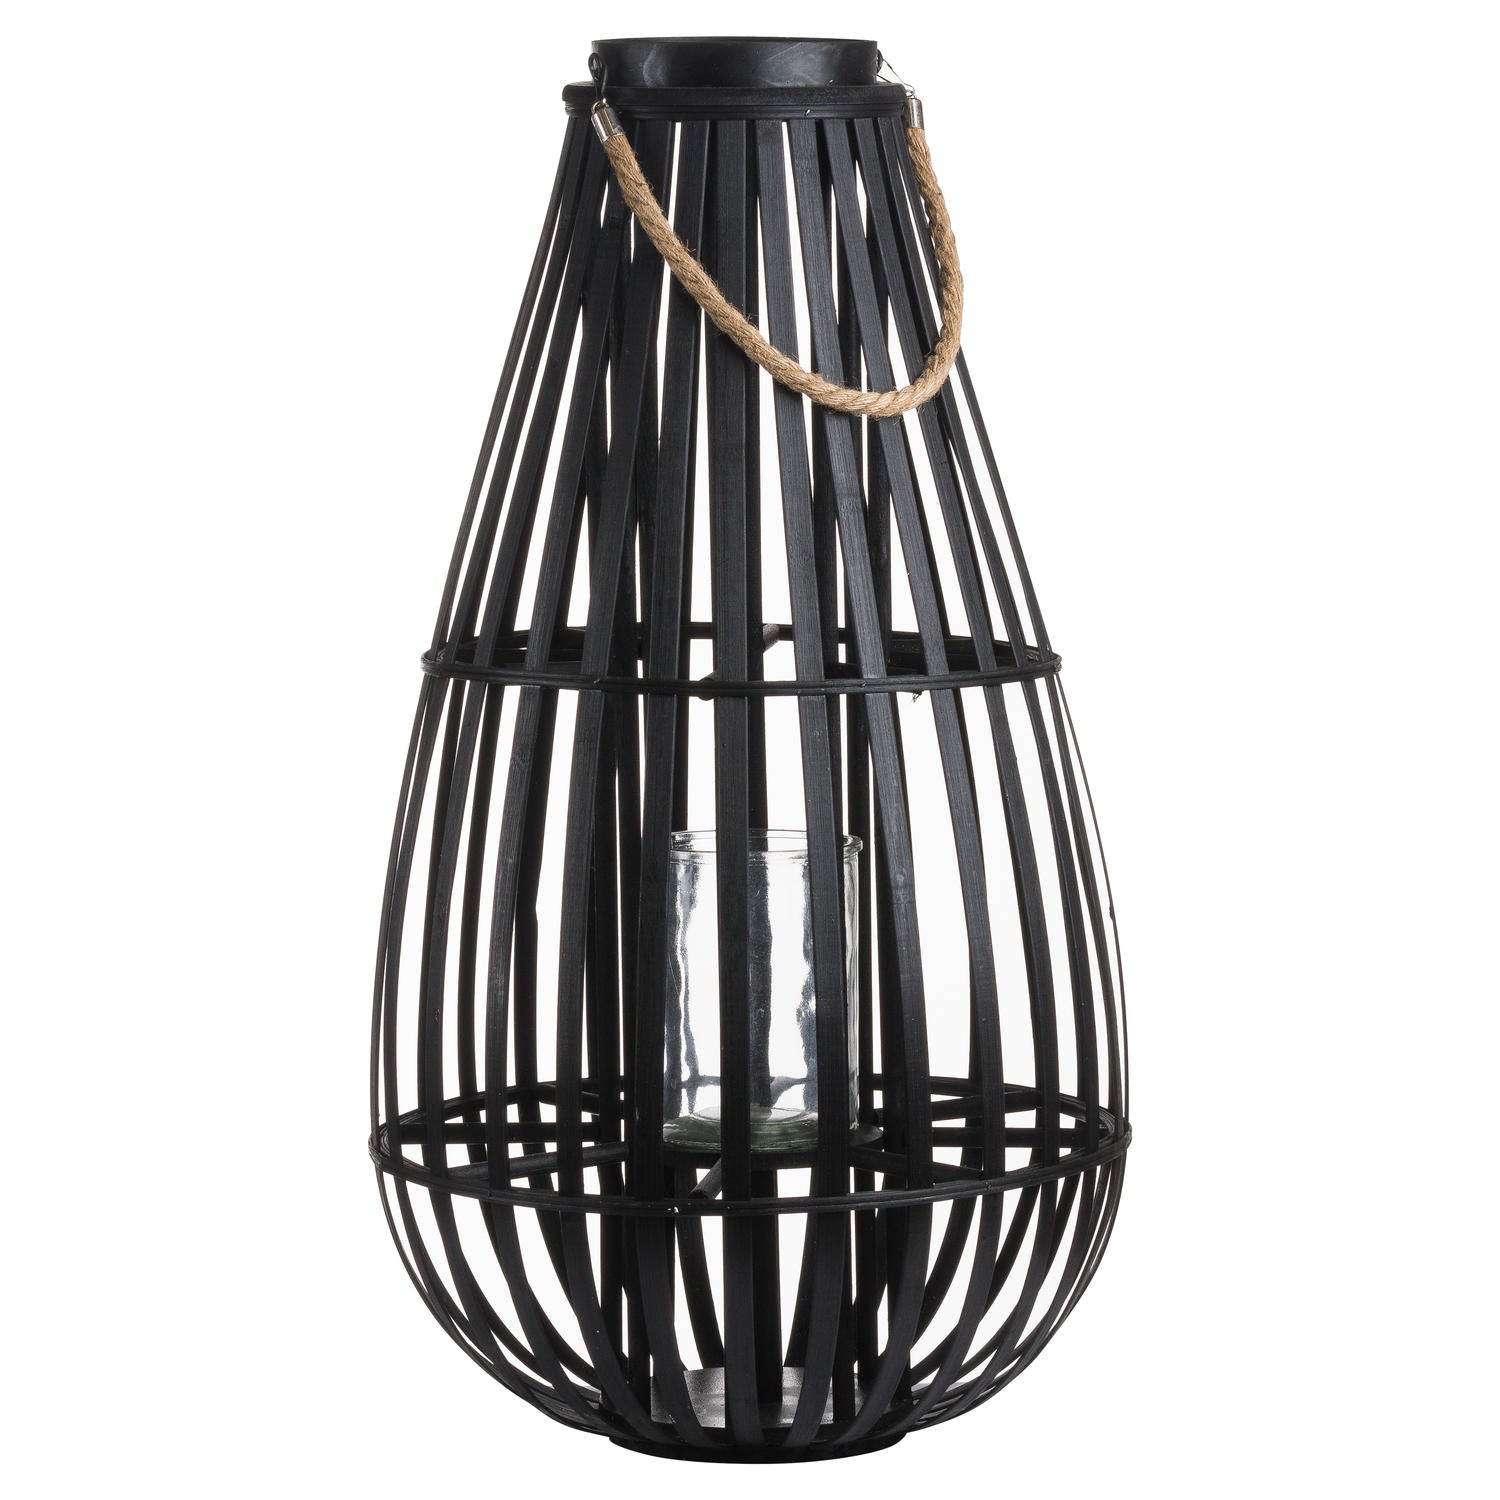 Large Floor Standing Domed Wicker Lantern With Rope Detail